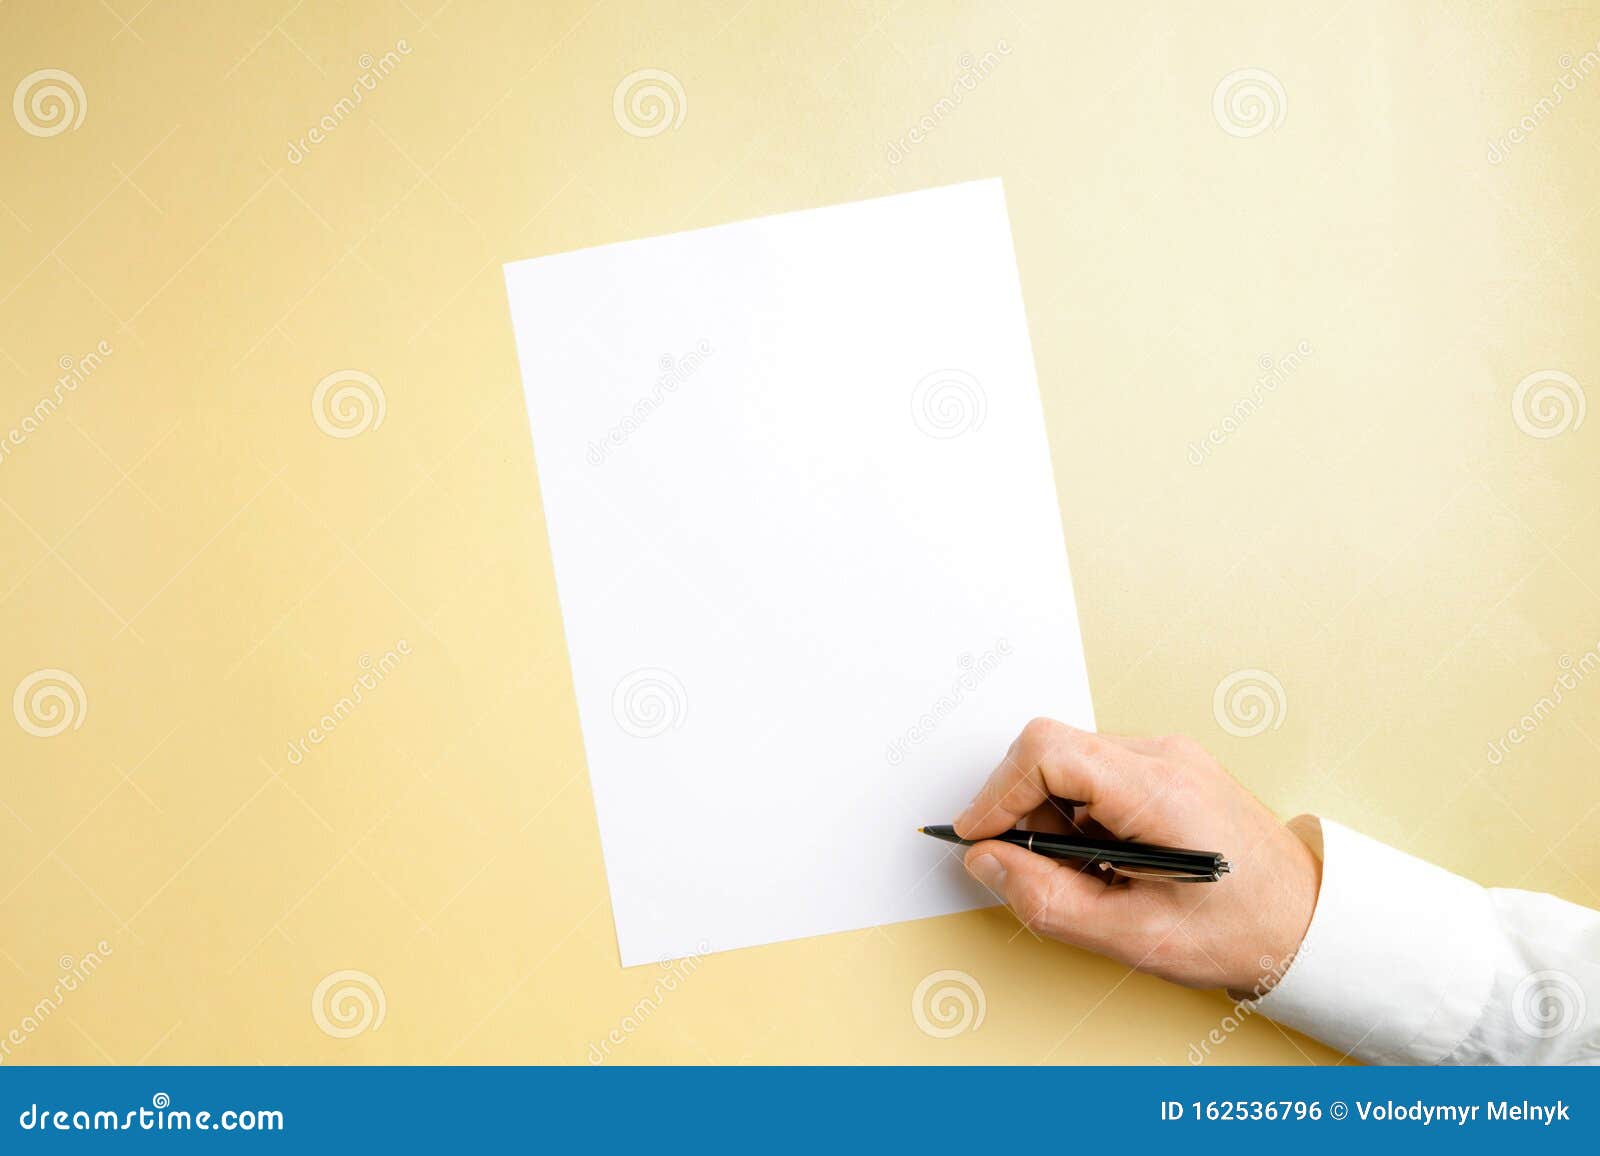 Male Hand Holding Pen and Writing on Empty Sheet on Yellow Background ...